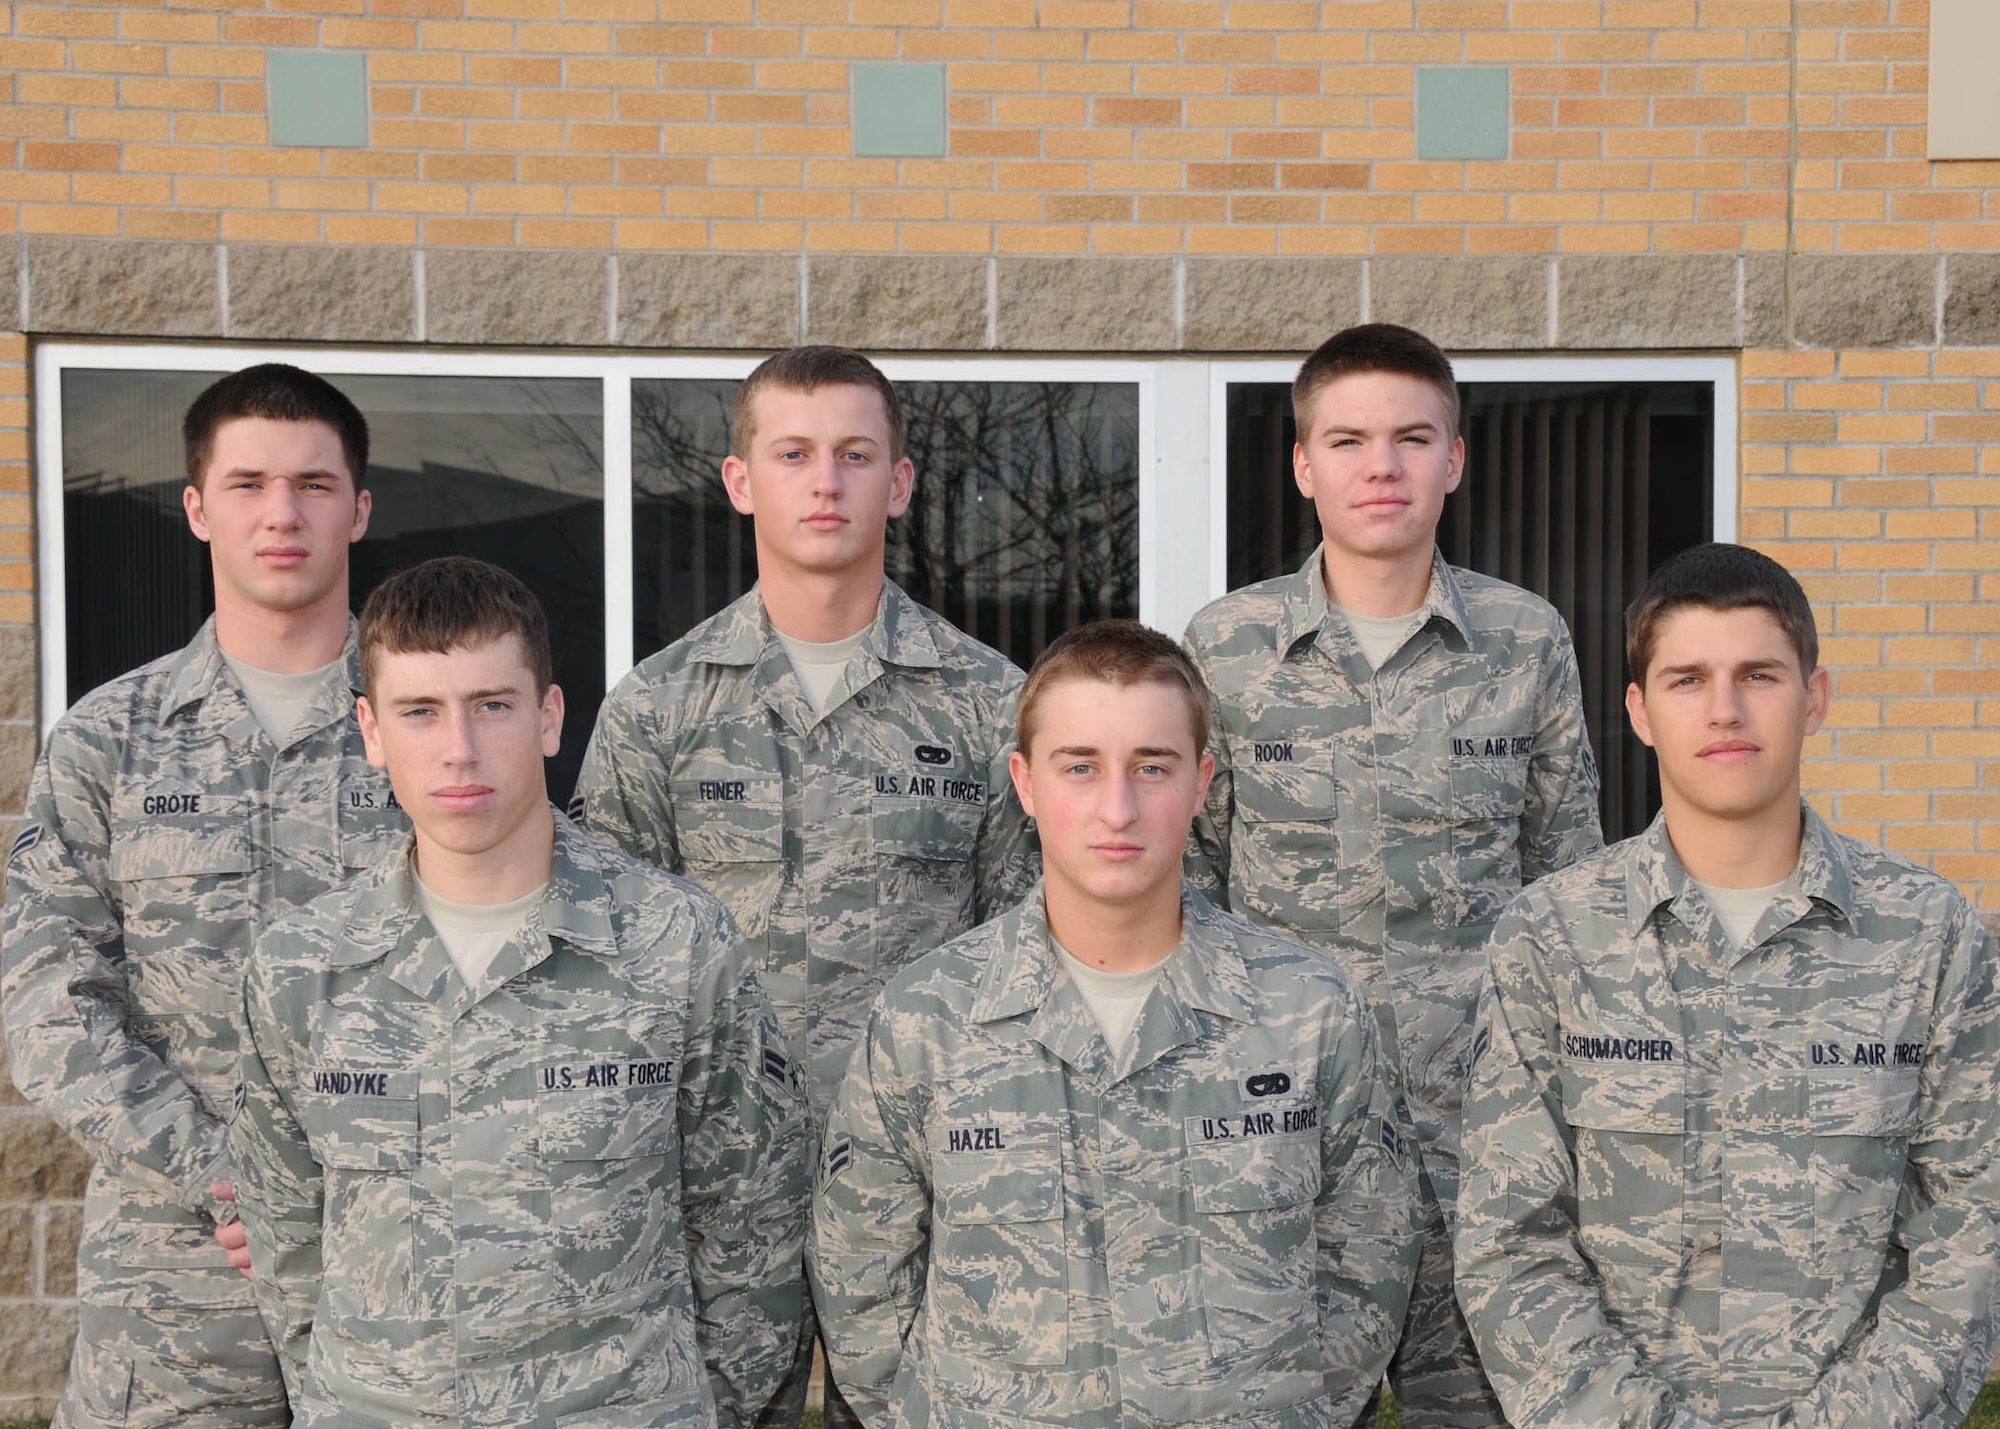 Top left to right: Airman 1st Class Taylor Grote, Adam Feiner, Devon Rook, Benjamin VanDyke, Jordan Hazel, Jerid Schumacher, participated in the "Student Flight Program" before their Air Force basic training. They have now graduated and are on their weekend drill duty, December 05, 2009.
Official Air Force Photo by: TSGT. Oscar M. Sanchez
